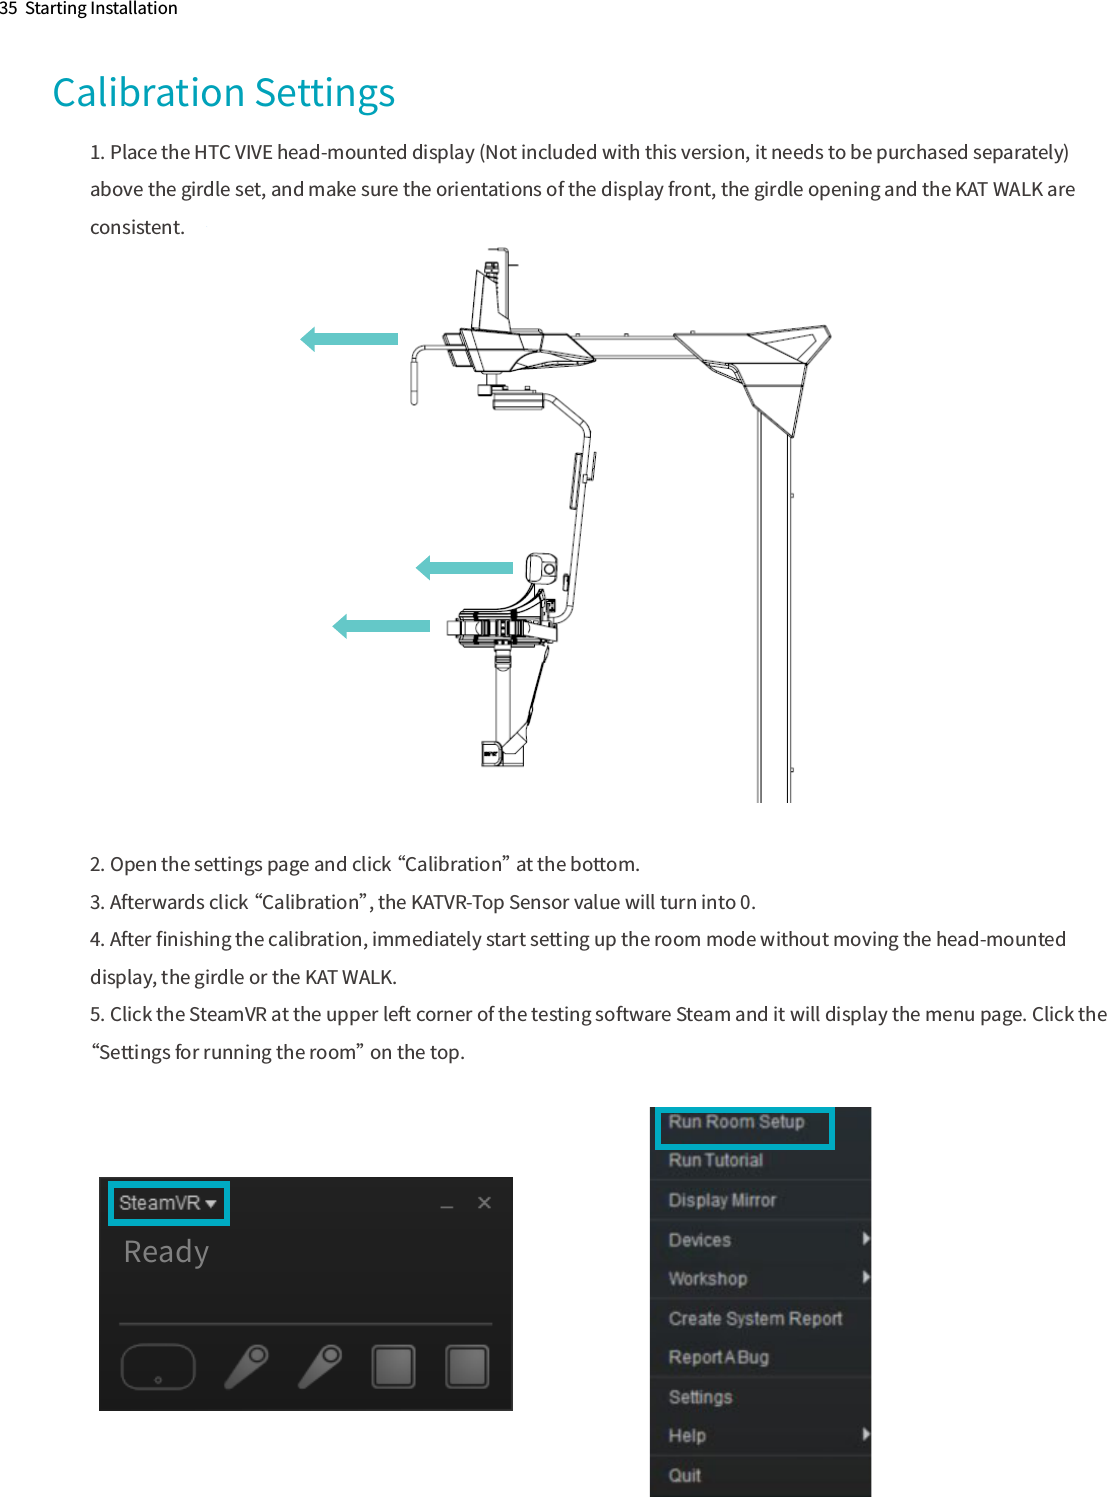 35  Starting InstallationCalibration Settings1. Place the HTC VIVE head-mounted display (Not included with this version, it needs to be purchased separately) above the girdle set, and make sure the orientations of the display front, the girdle opening and the KAT WALK are consistent.2. Open the settings page and click “Calibration” at the bottom.3. Afterwards click “Calibration”, the KATVR-Top Sensor value will turn into 0.4. After ﬁnishing the calibration, immediately start setting up the room mode without moving the head-mounted display, the girdle or the KAT WALK.5. Click the SteamVR at the upper left corner of the testing software Steam and it will display the menu page. Click the “Settings for running the room” on the top.Ready